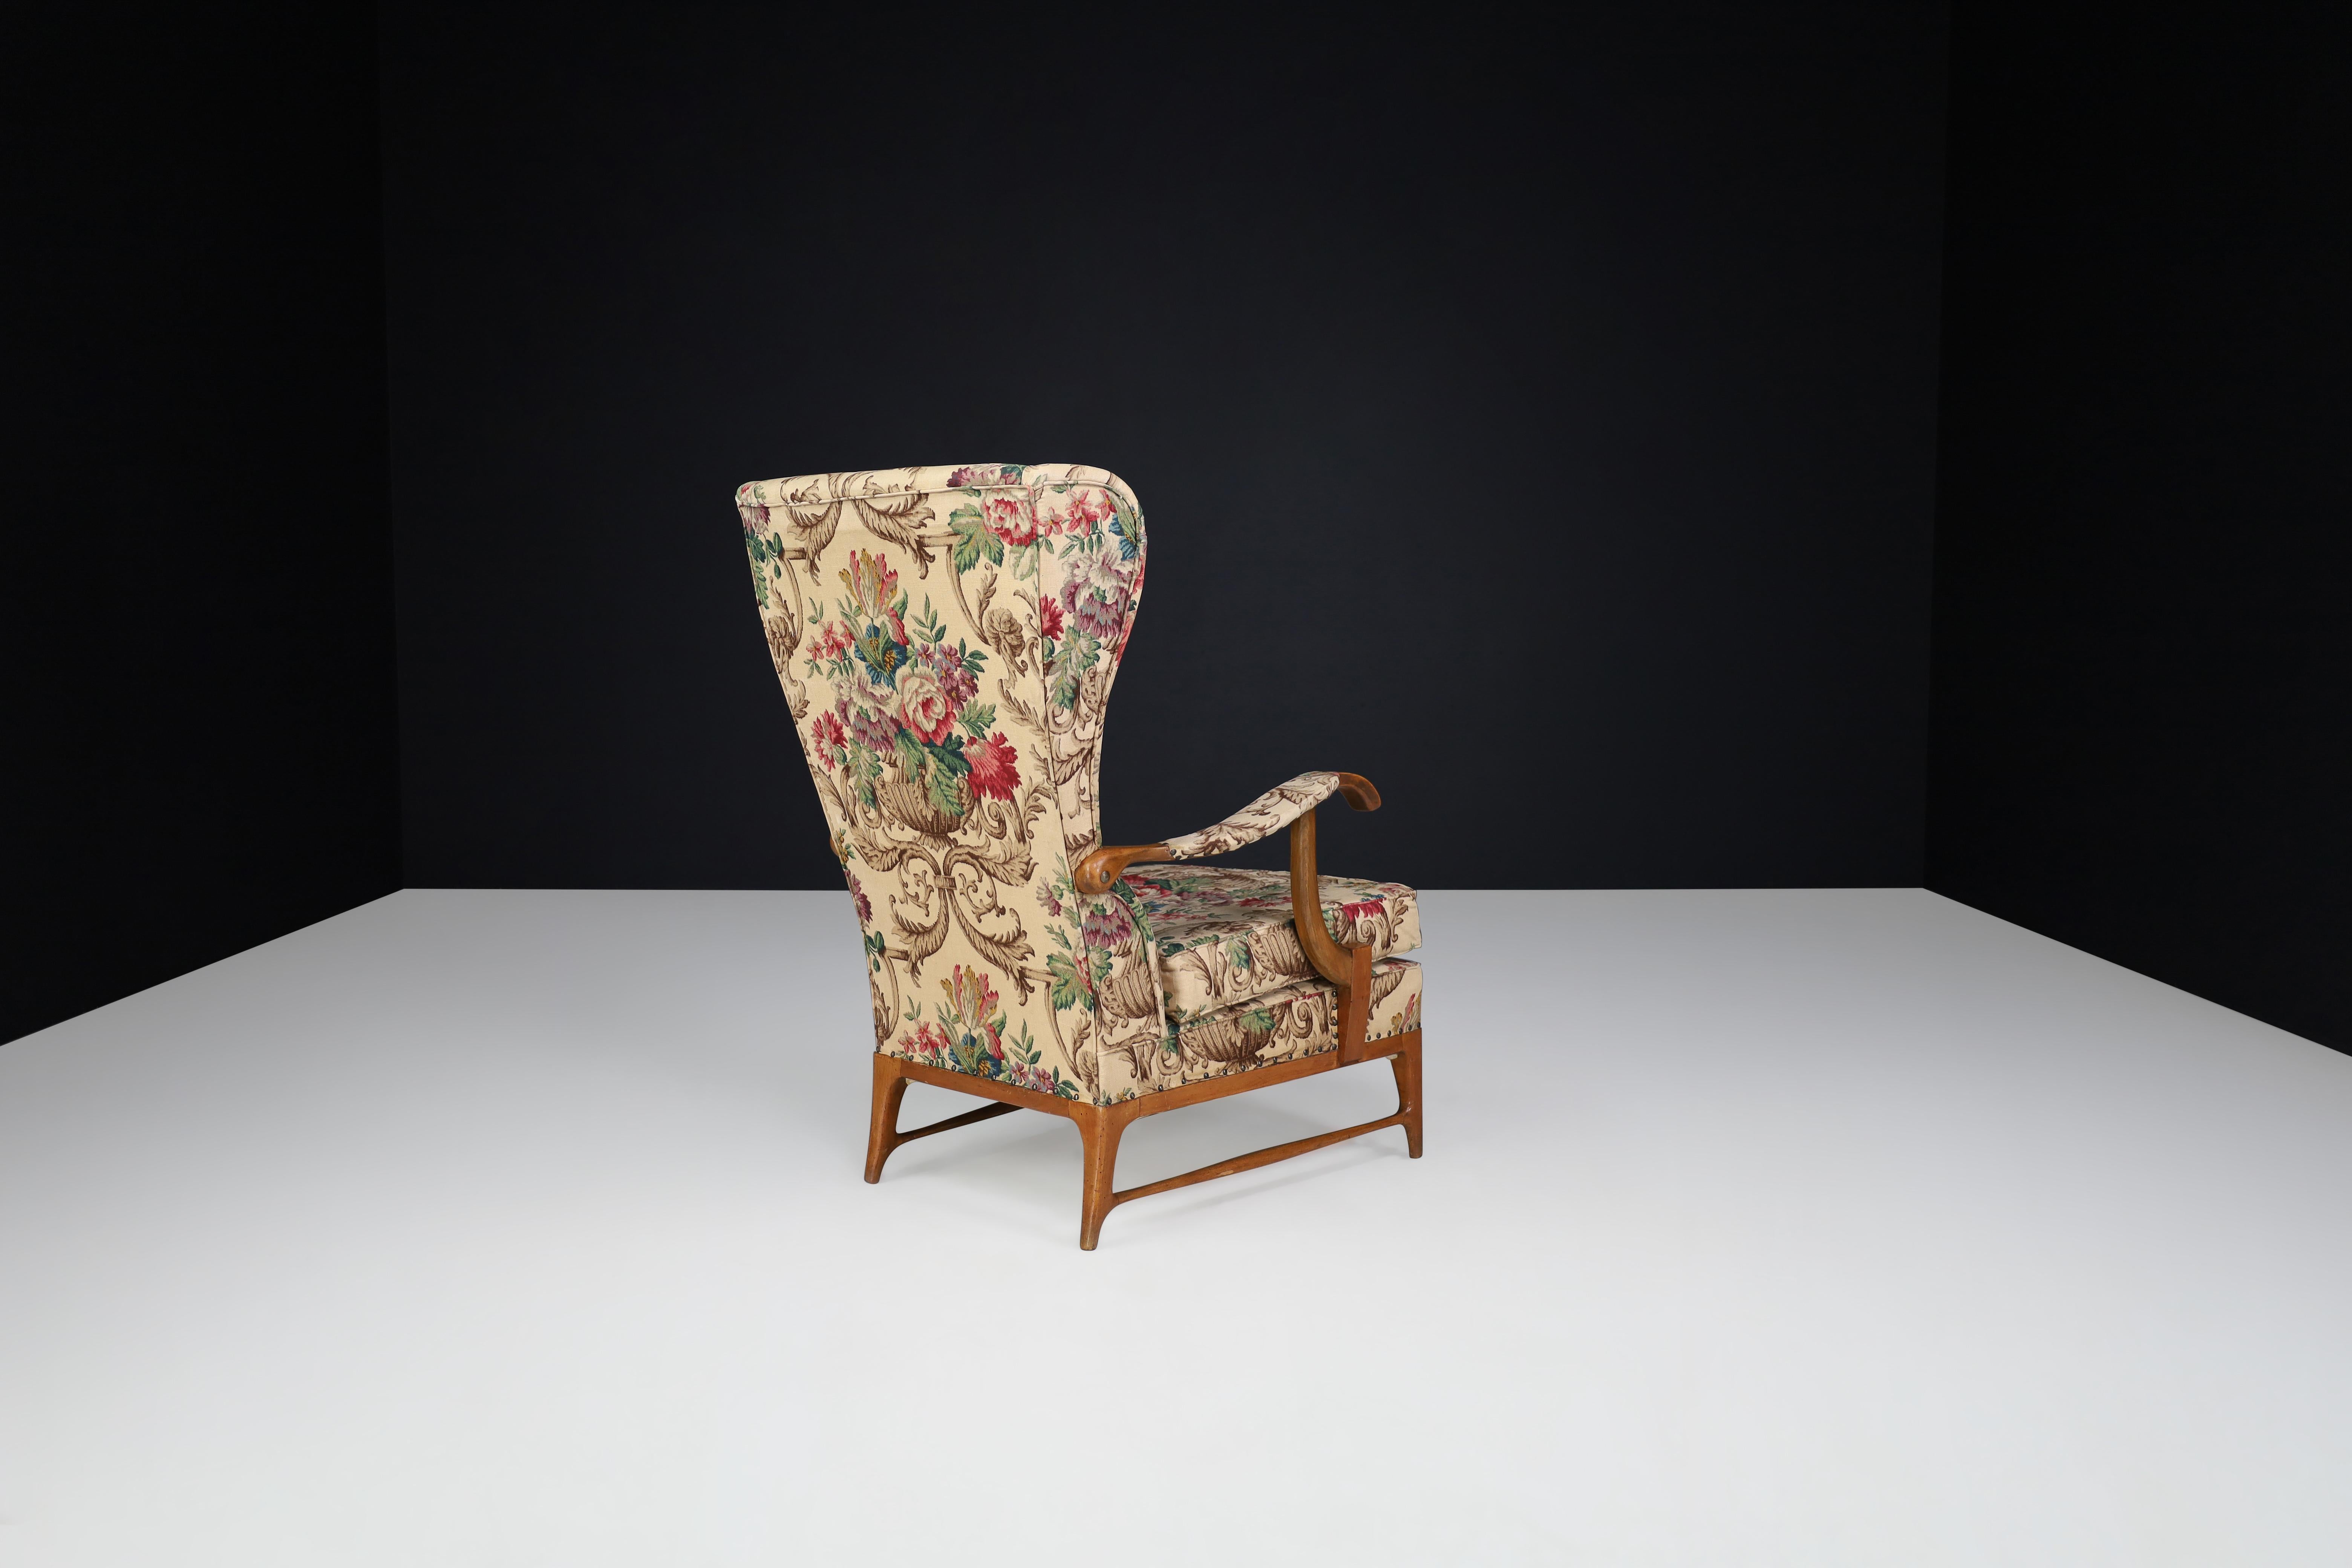 20th Century Paolo Buffa High-Back Armchairs with Floral Upholstery, Italy, 1940s